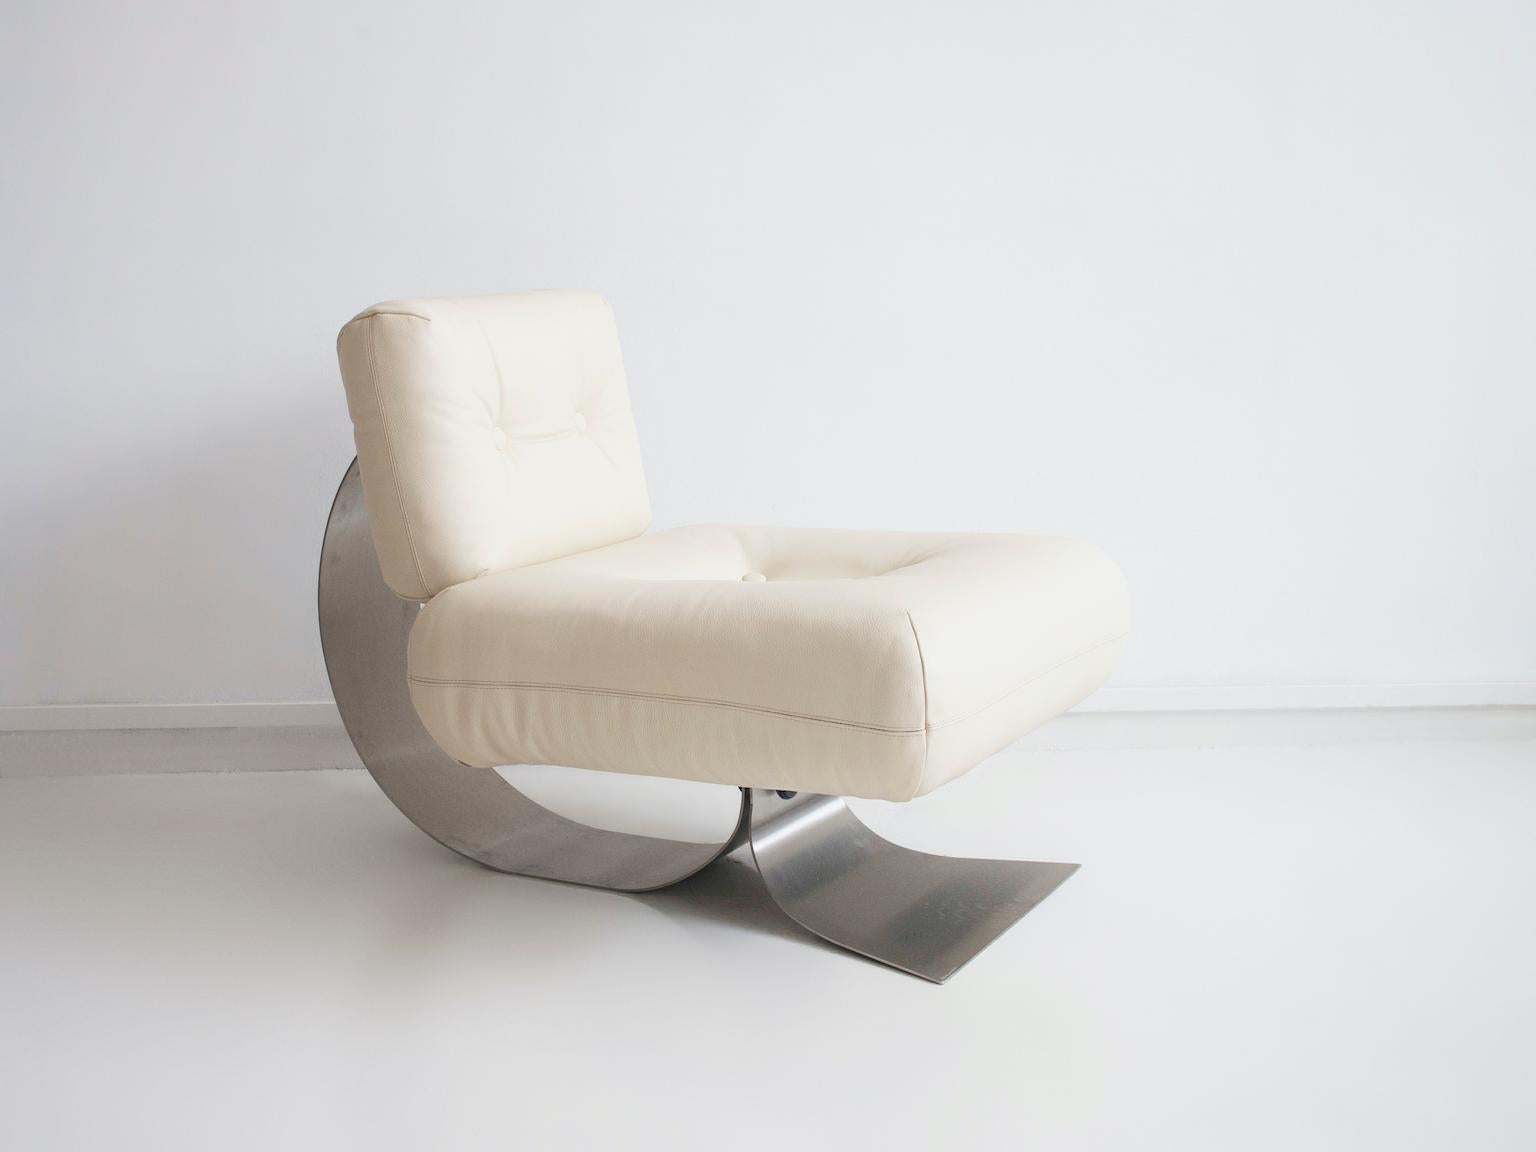 Iconic 'Alta' lounge chair with ottoman designed by Brazilian architect Oscar Niemeyer and manufactured by Mobilier International in France. Made of steel with white leather upholstery, 1970s. Labeled by producer.
Ottoman measurements: Height 47